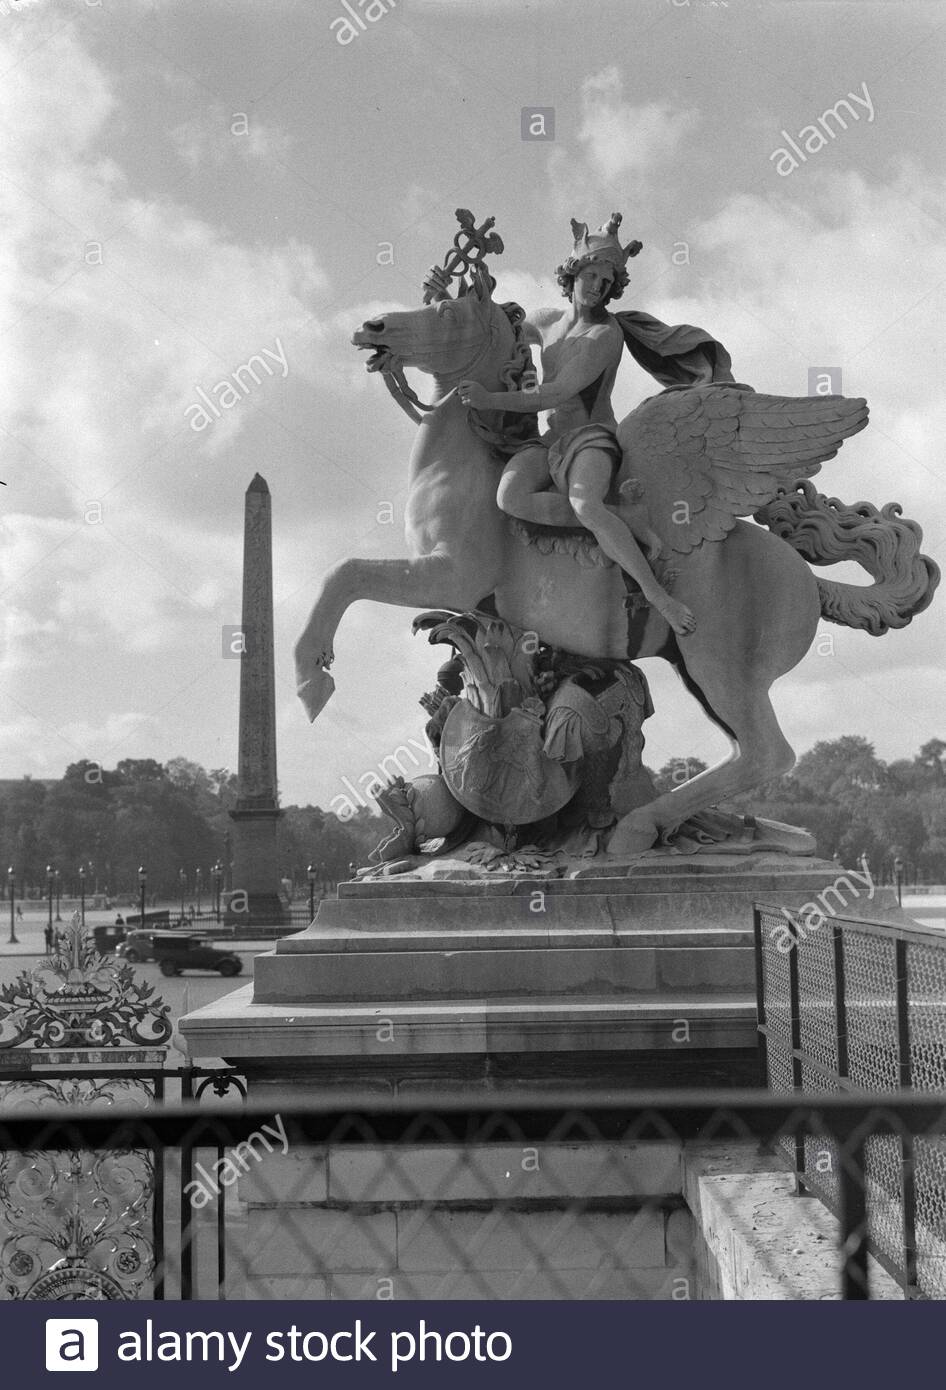 reportage paris description image mercure at the entrance of the jardin des tuileries annotation the sculptures mercure and la renomme are by antoine coysevox 1640 1720 they were placed in 1719 at the western entrance of the tuileries date 1935 location france paris keywords sculptures city sculptures 2APE9X9